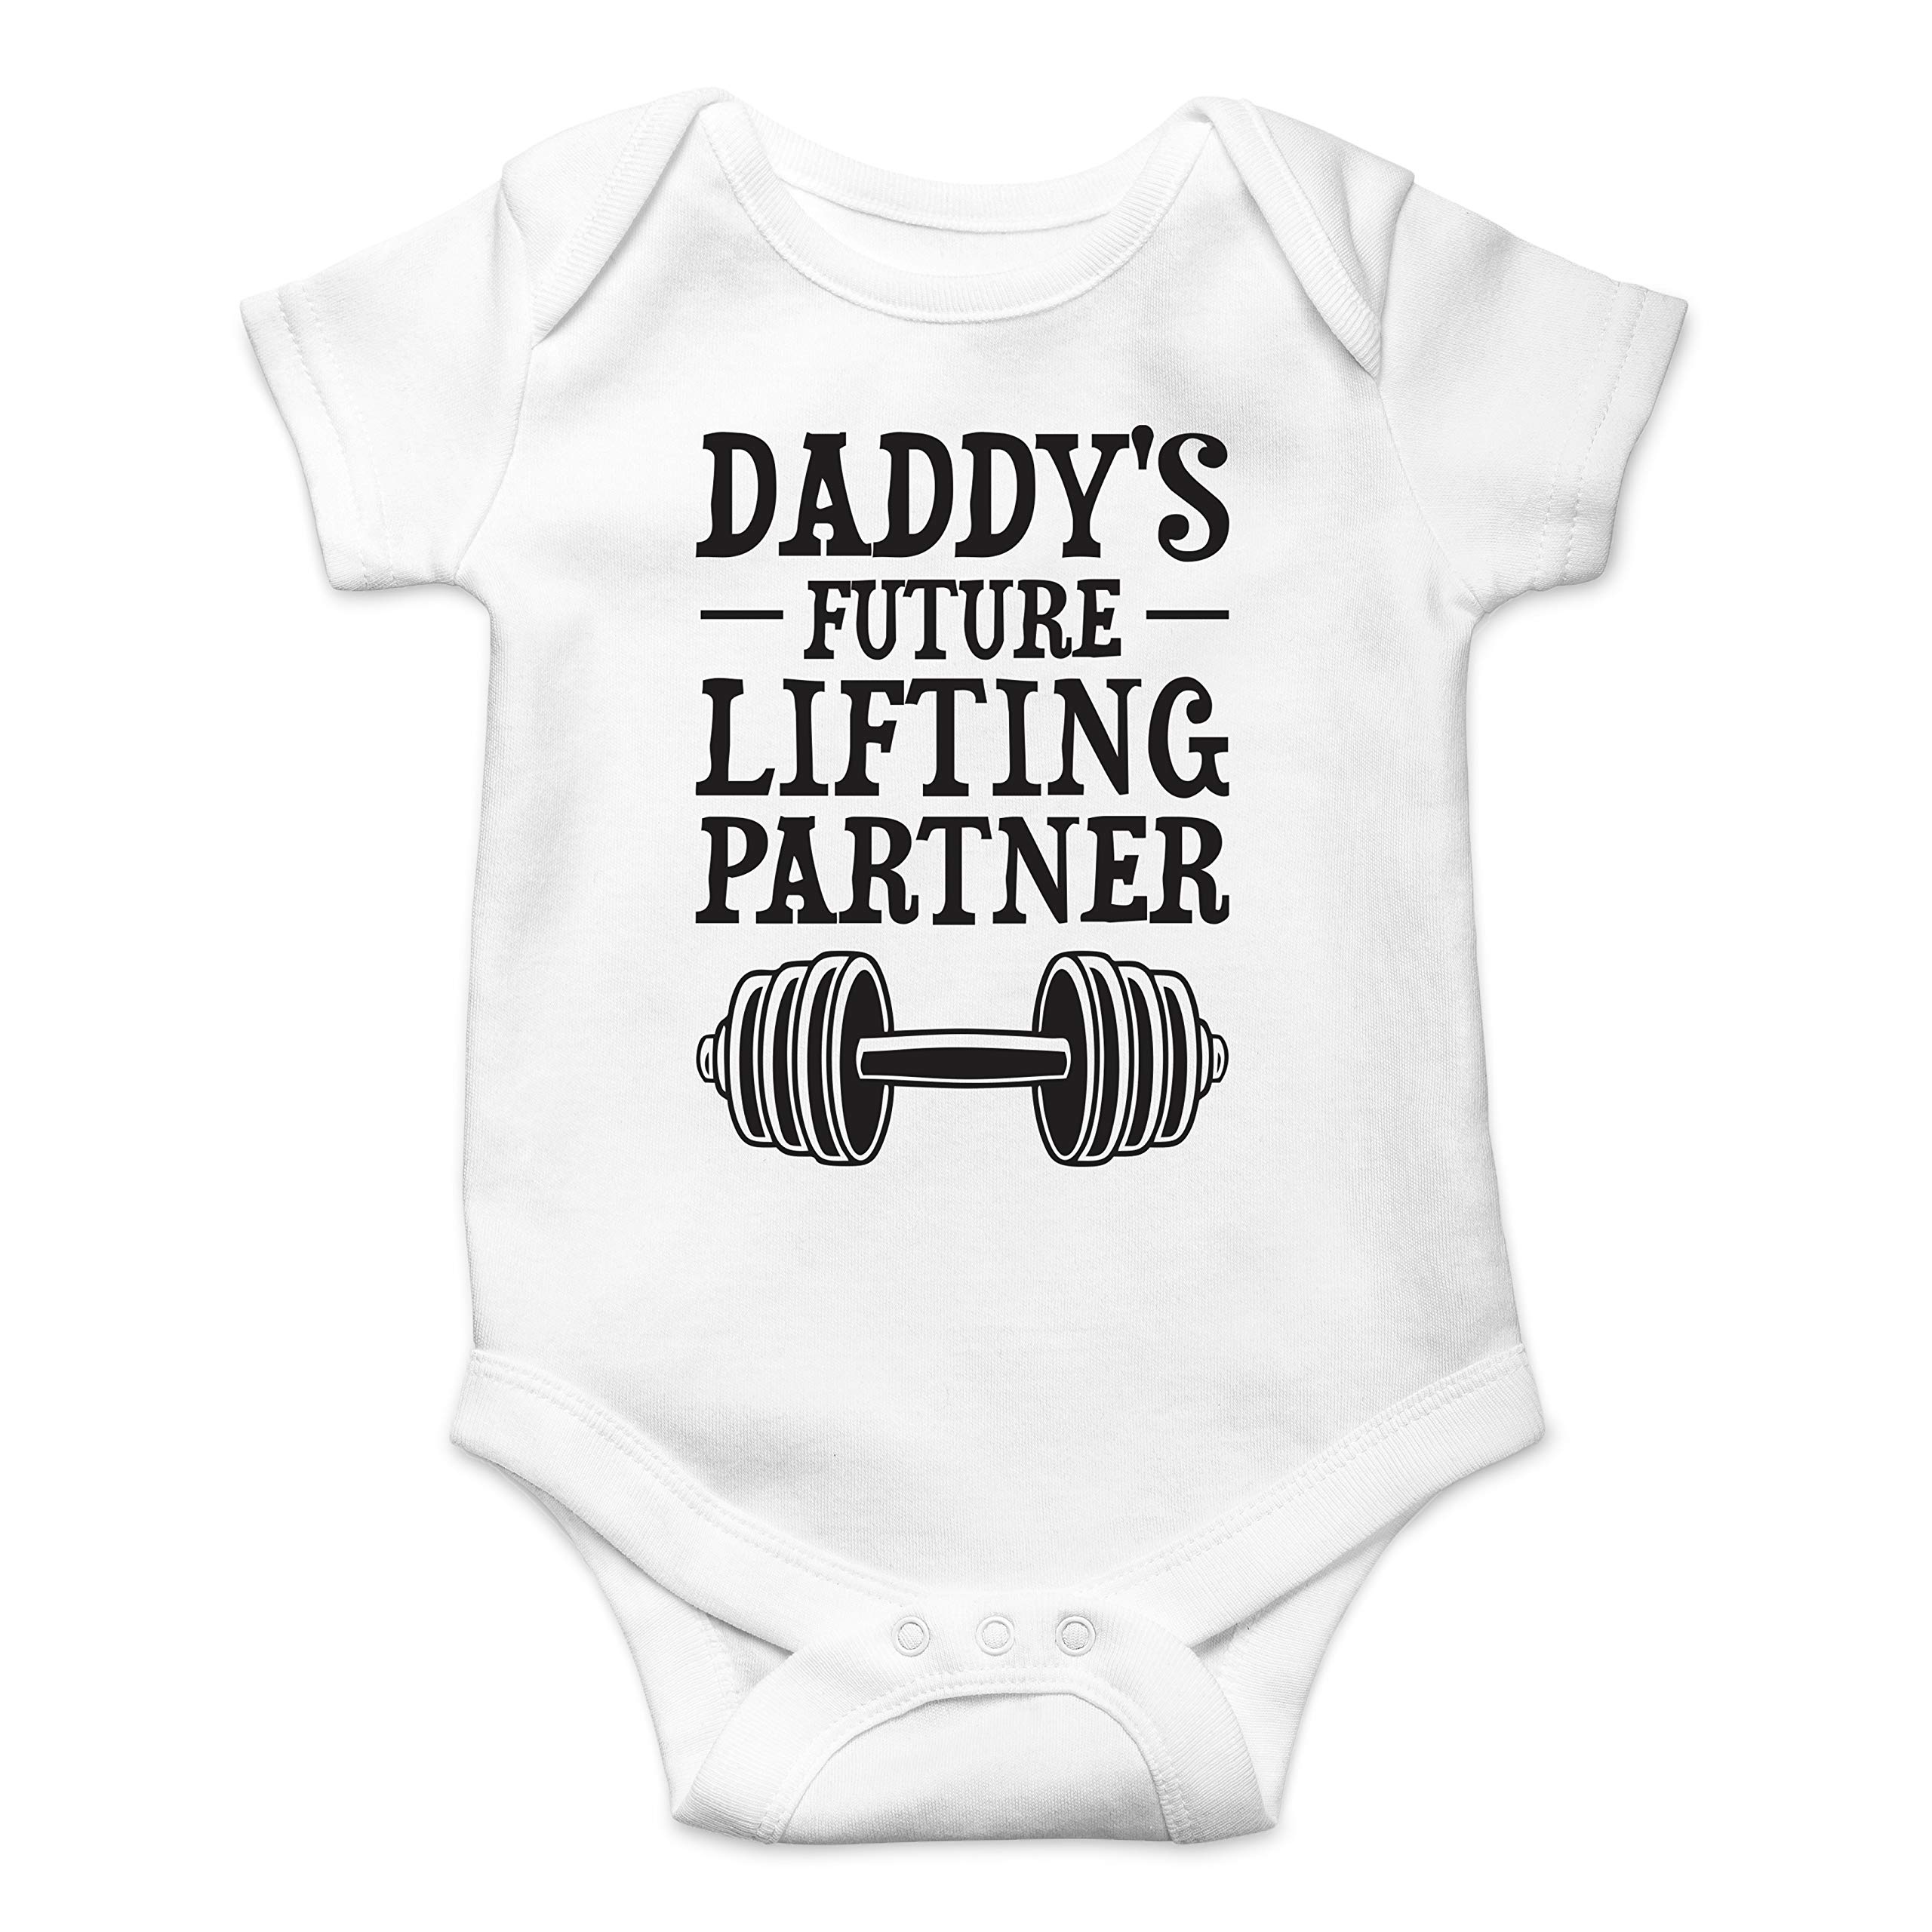 Daddy's Future Lifting Partner - Funny Cute Infant Creeper, One-Piece Baby Bodysuit